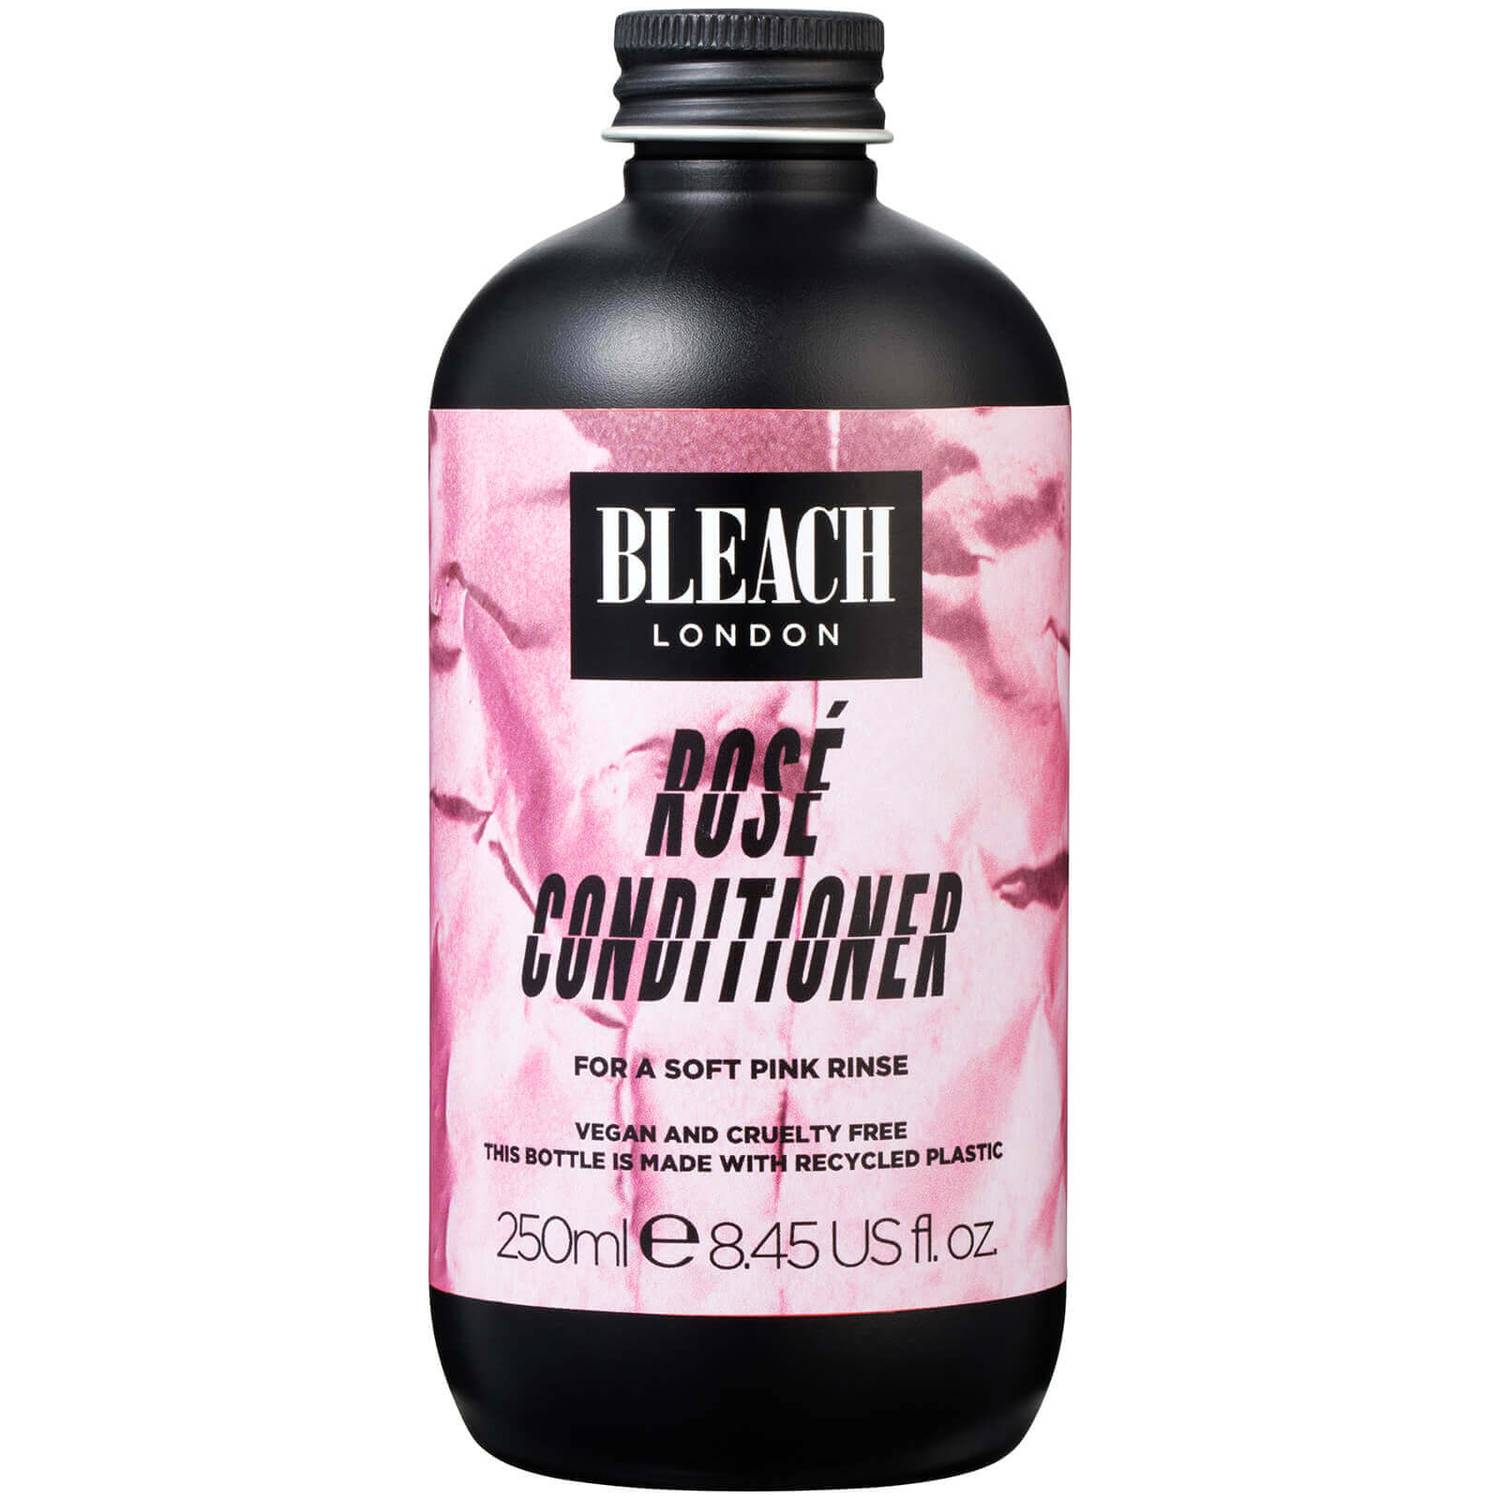 BLEACH LONDON Rose Shampoo and Conditioner Duo